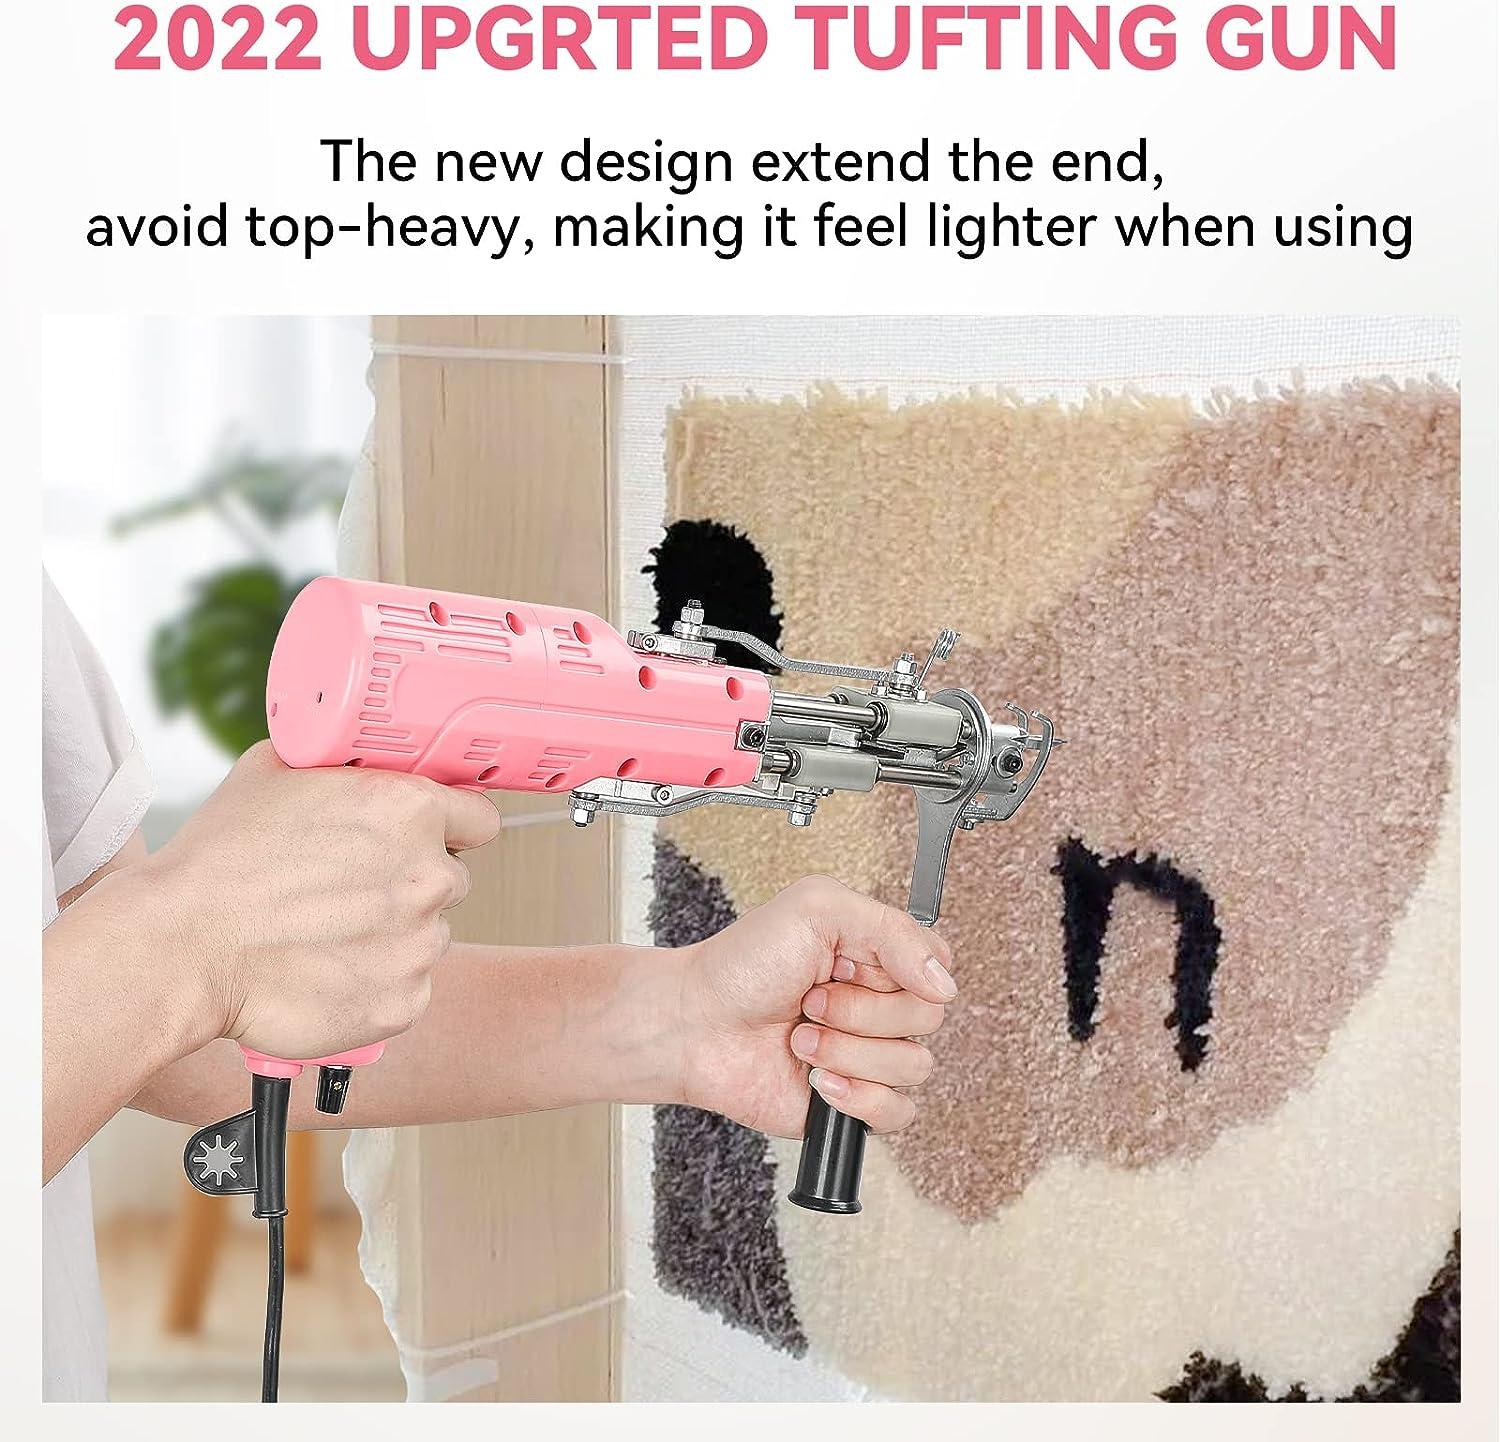 Rug Tufting Gun Cut Pile Loop Pile 2 in 1 Riiai RT-III Pro Tufting Gun Kit  with Speed Adjustable Feels Lighter More Safer Fashion Design  Low-Maintenance Beginners Recommend Baby Pink